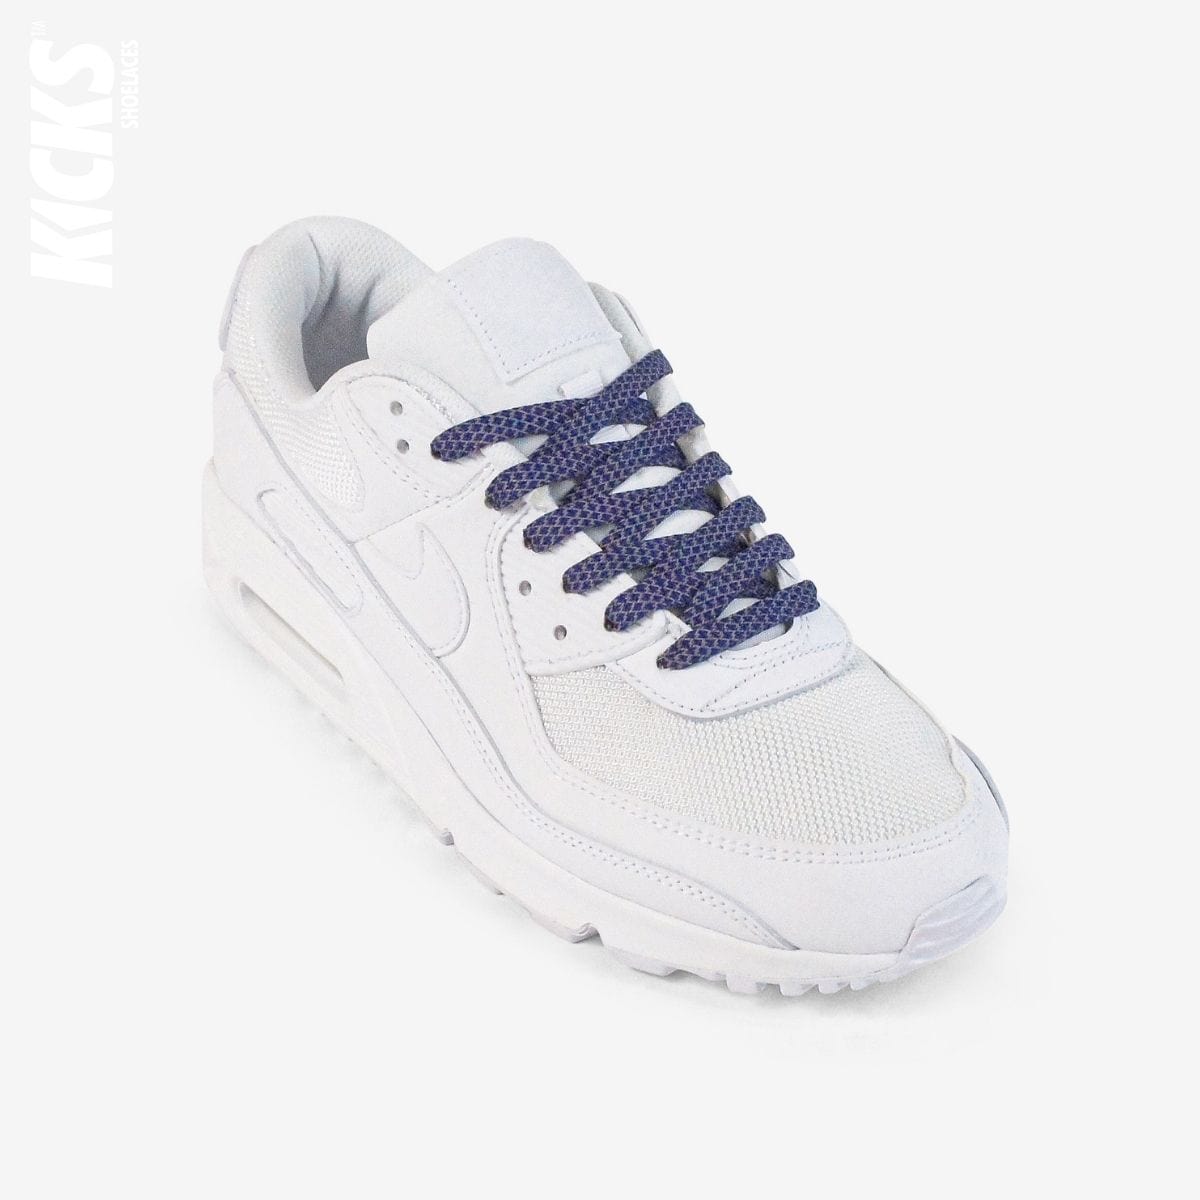 dark-blue-reflective-colored-shoelaces-on-white-sneakers